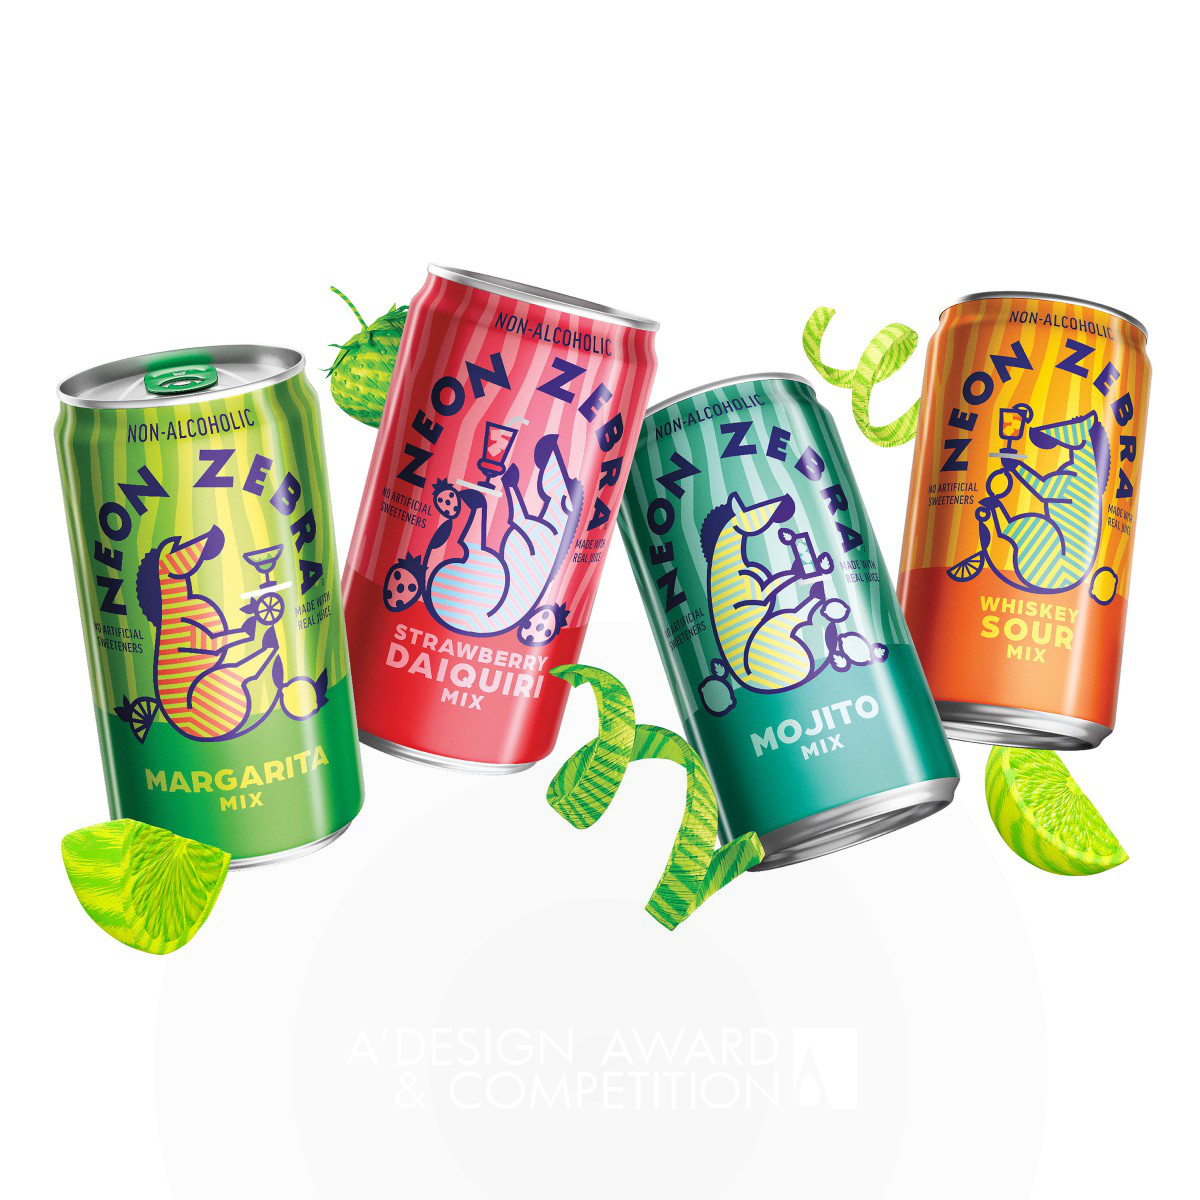 PepsiCo Design and Innovation wins Silver at the prestigious A' Packaging Design Award with Neon Zebra Brand Launch Beverage Packaging.